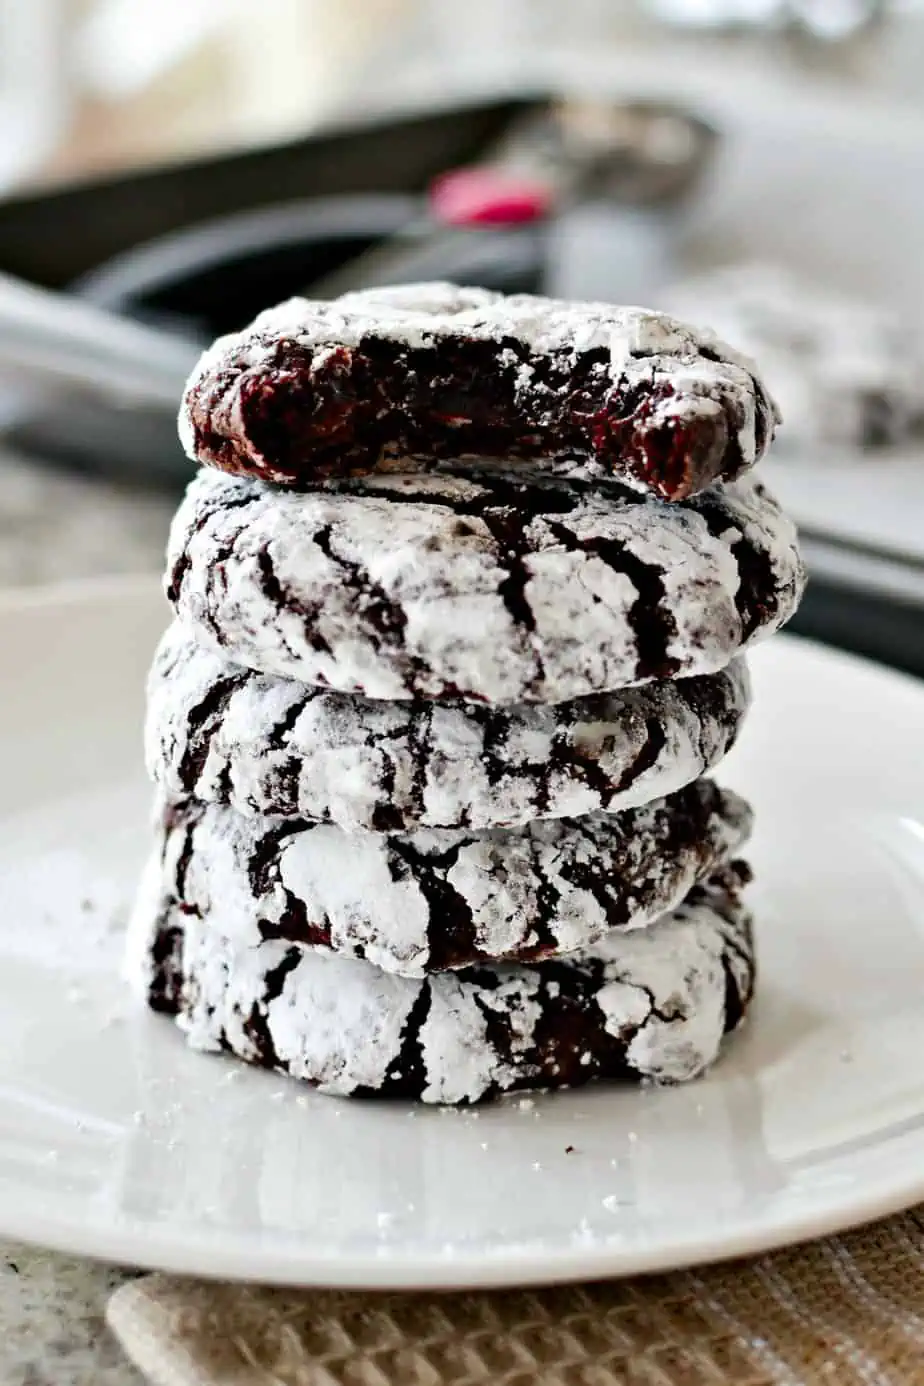 A stack of Chocolate Crinkle cookies coated in powdered sugar, with the top one taken a bite out of it.